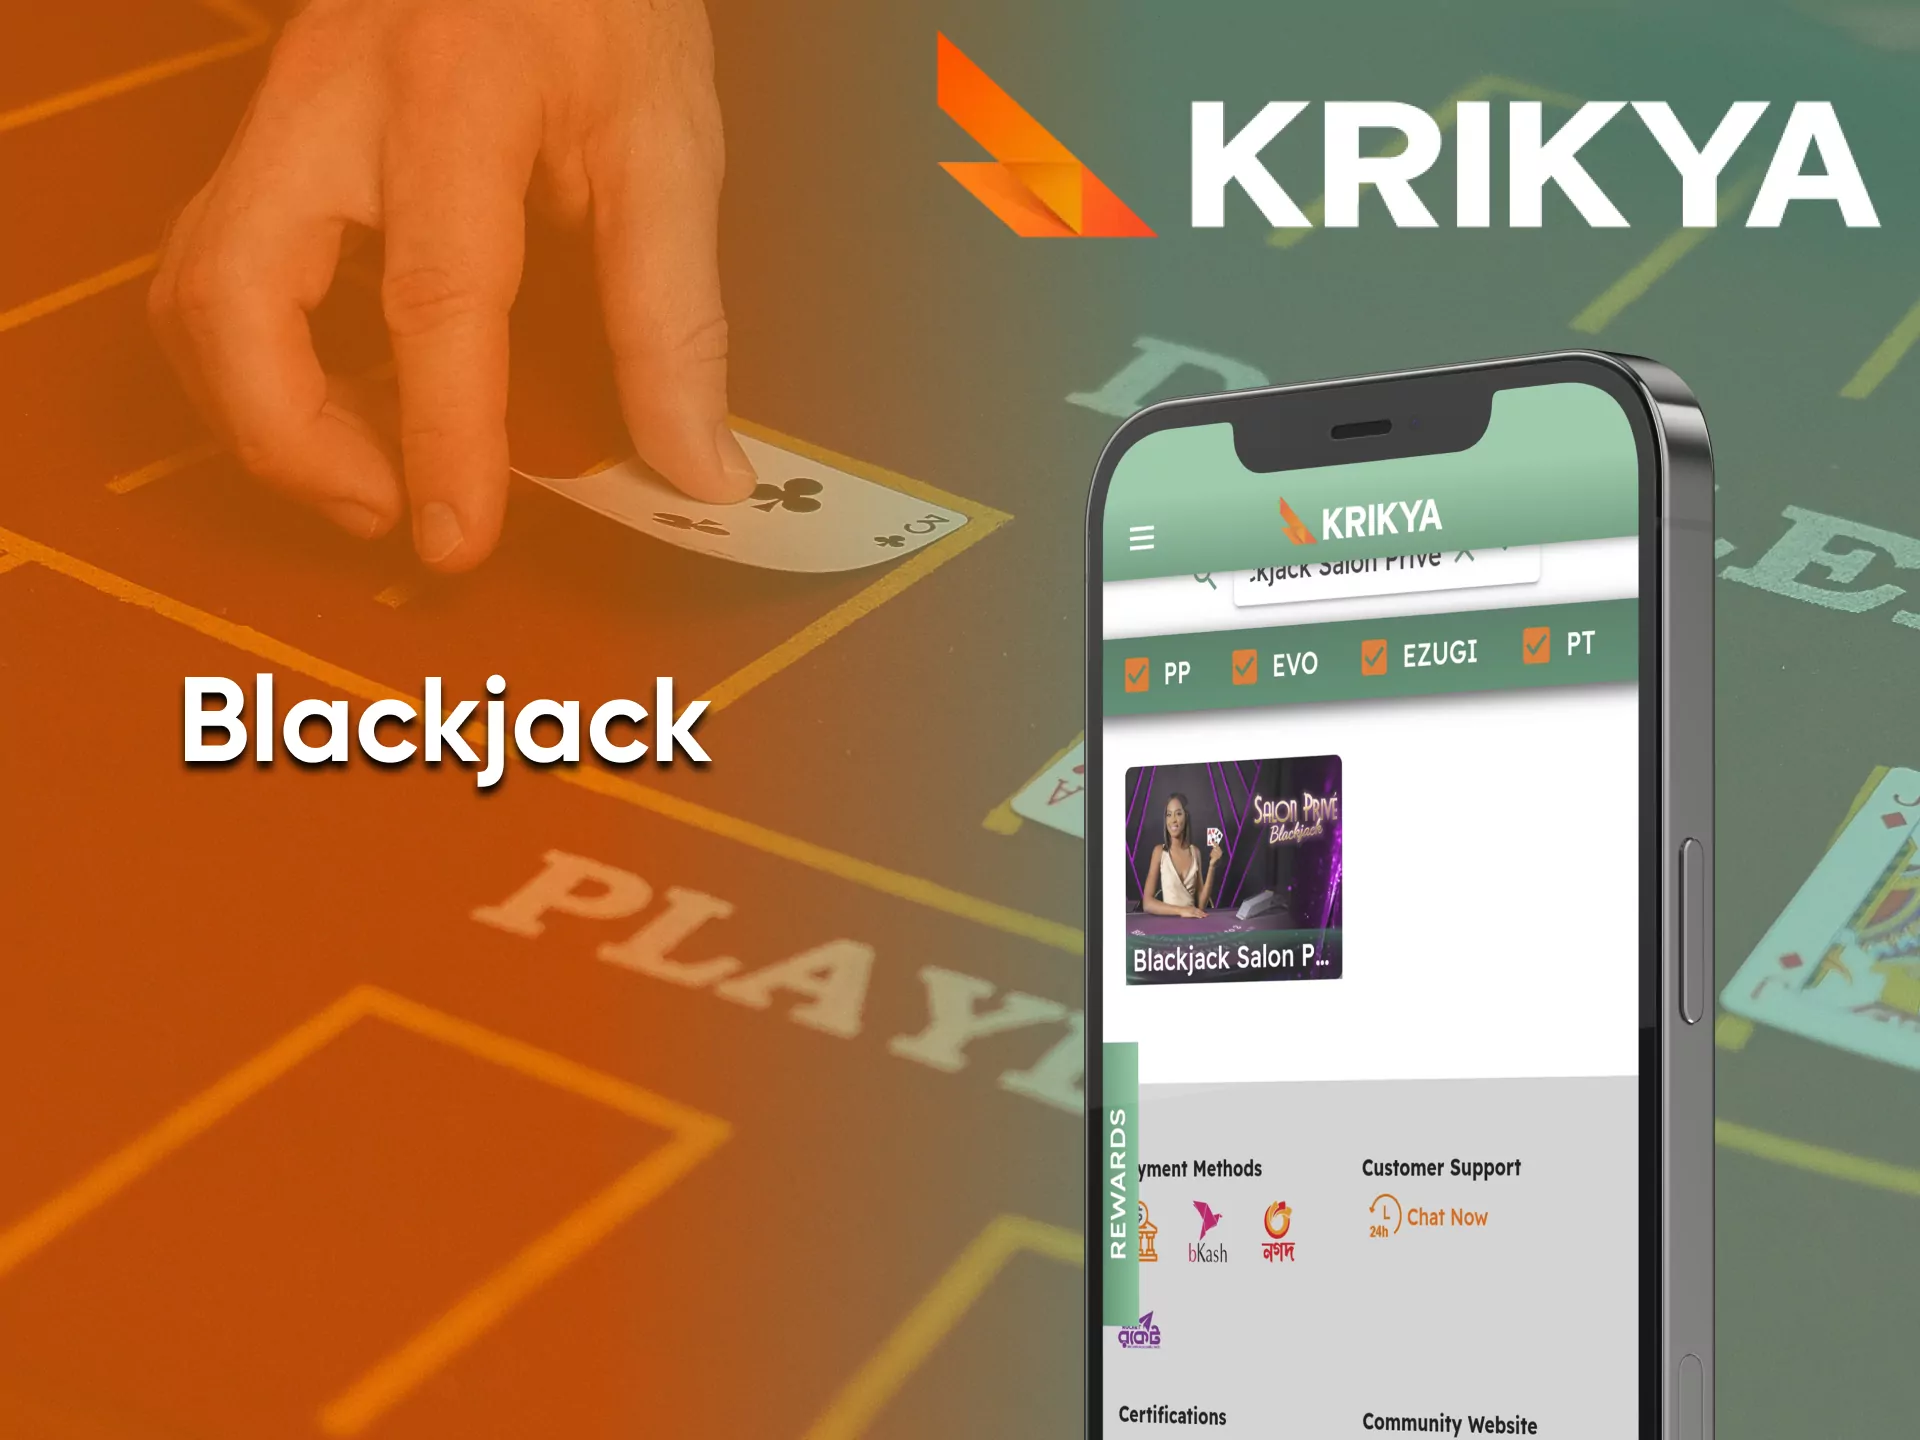 Blackjack is a game that you can play through the Krikya app.